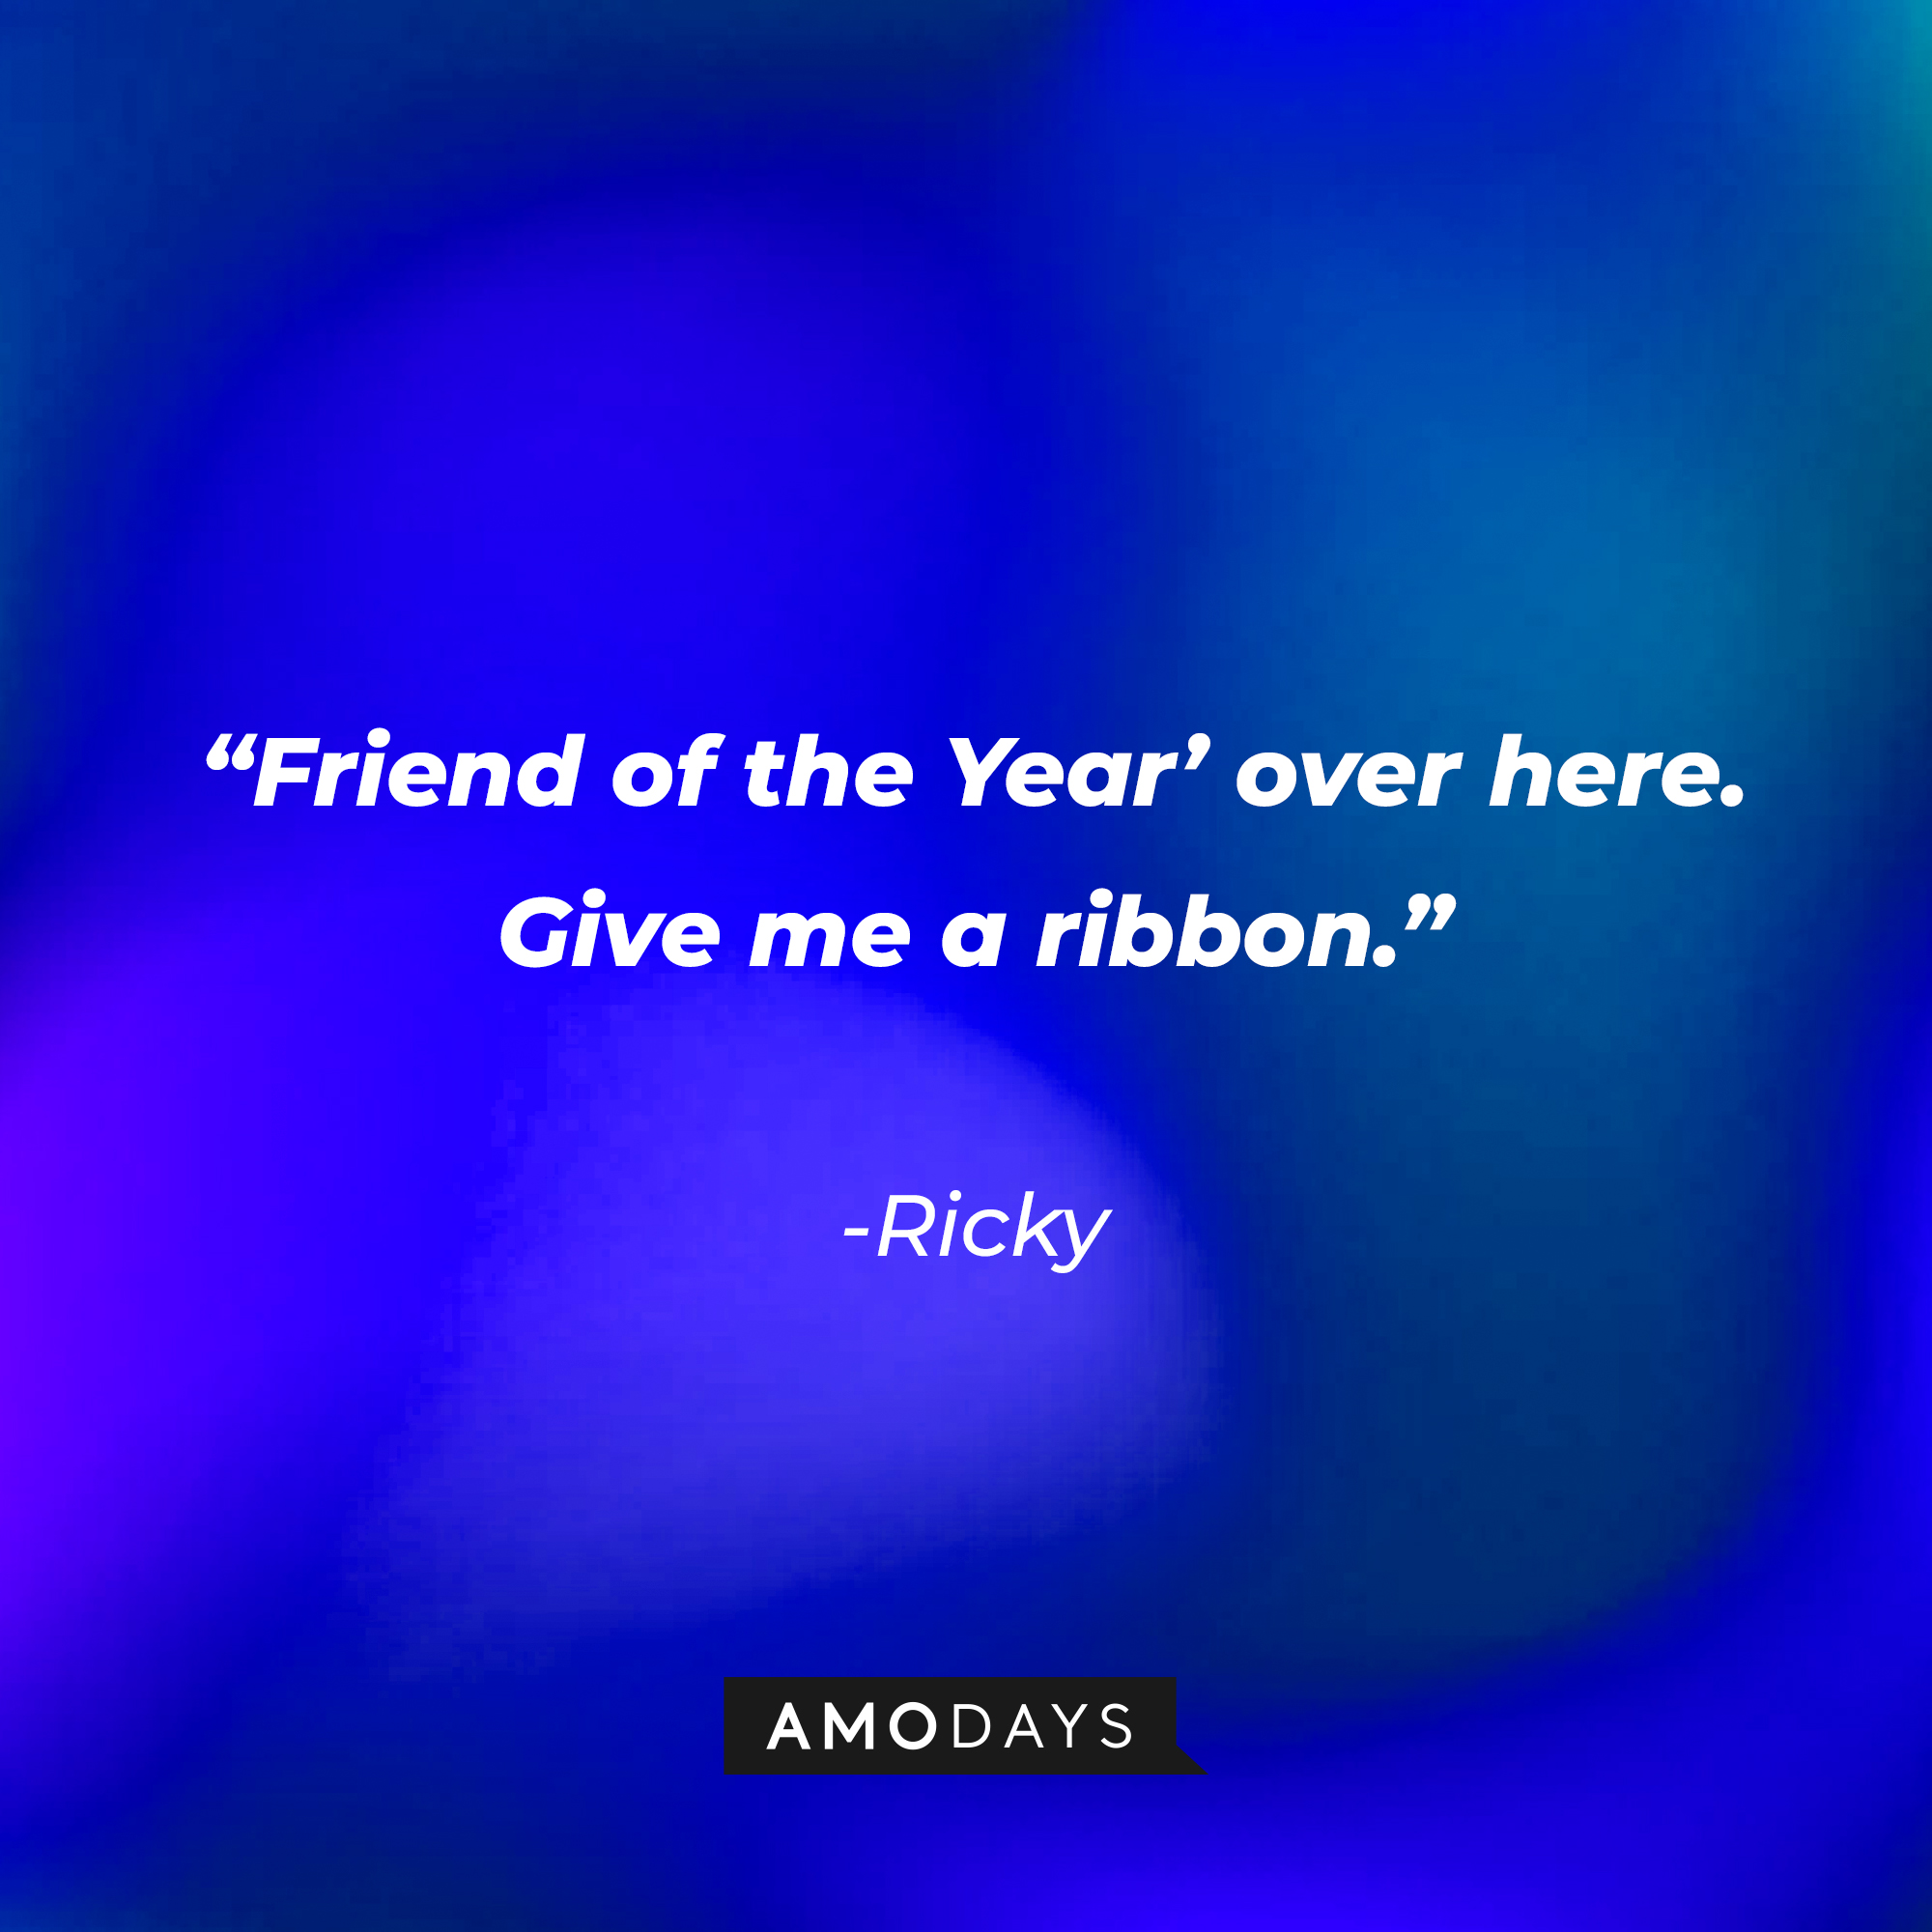 Ricky’s quote: "'Friend of the Year' over here. Give me a ribbon." | Source: AmoDays